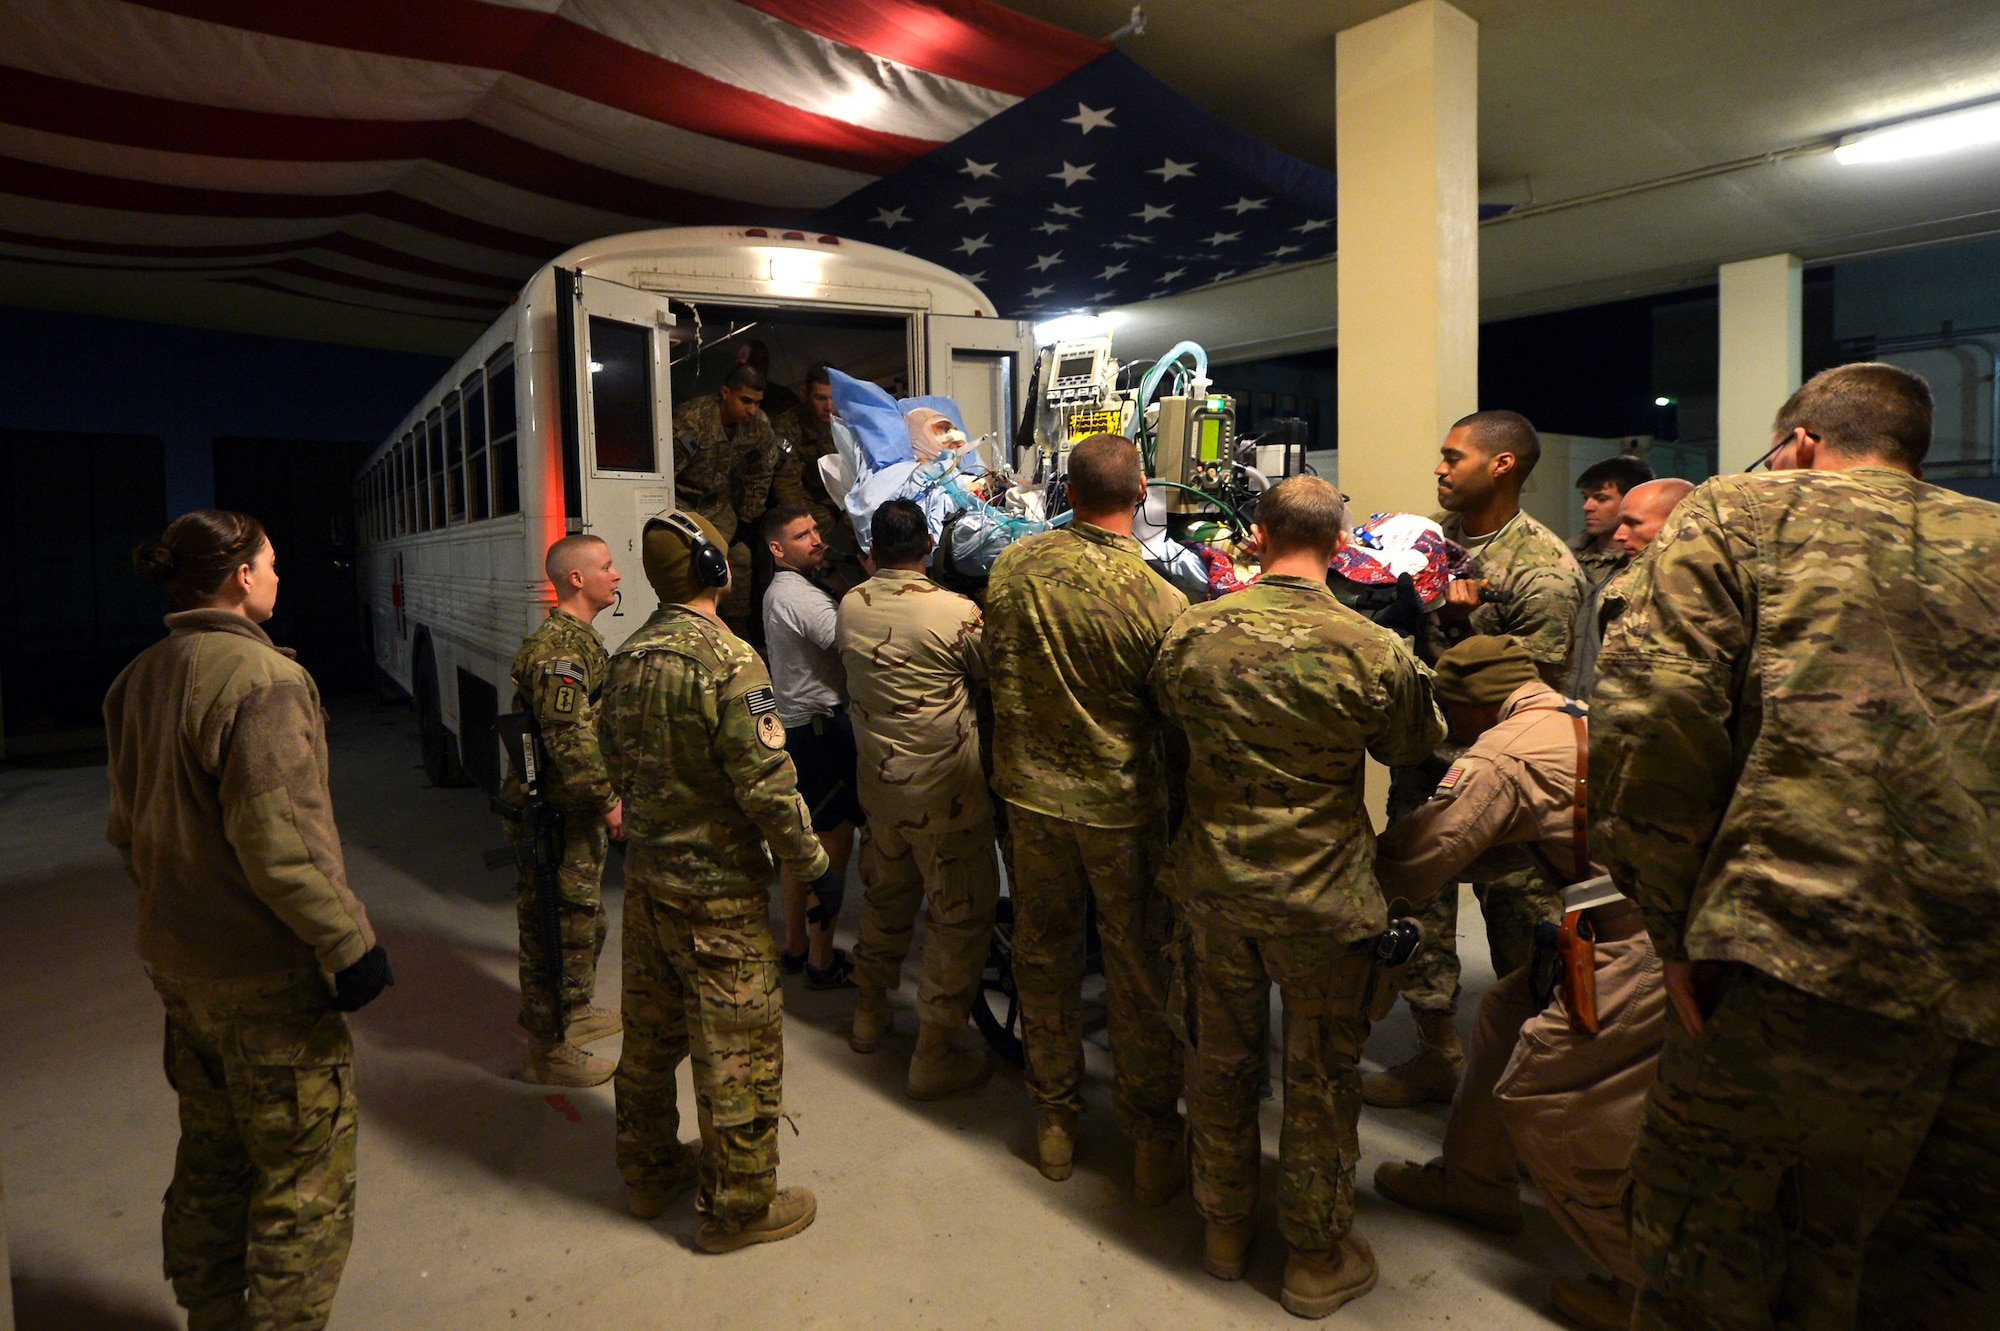 Members of the Contingency Aeromedical Staging Facility and 455th Expeditionary Aeromedical Evacuation Squadron assist patients onto medical bus bound for the flightline on Bagram Airfield, Afghanistan, March 21, 2013. The CASF is the relay between the Craig Joint Theater Hospital and aeromedical evacuation missions throughout Afghanistan.  (U.S. Air Force photo/Senior Airman Chris Willis)